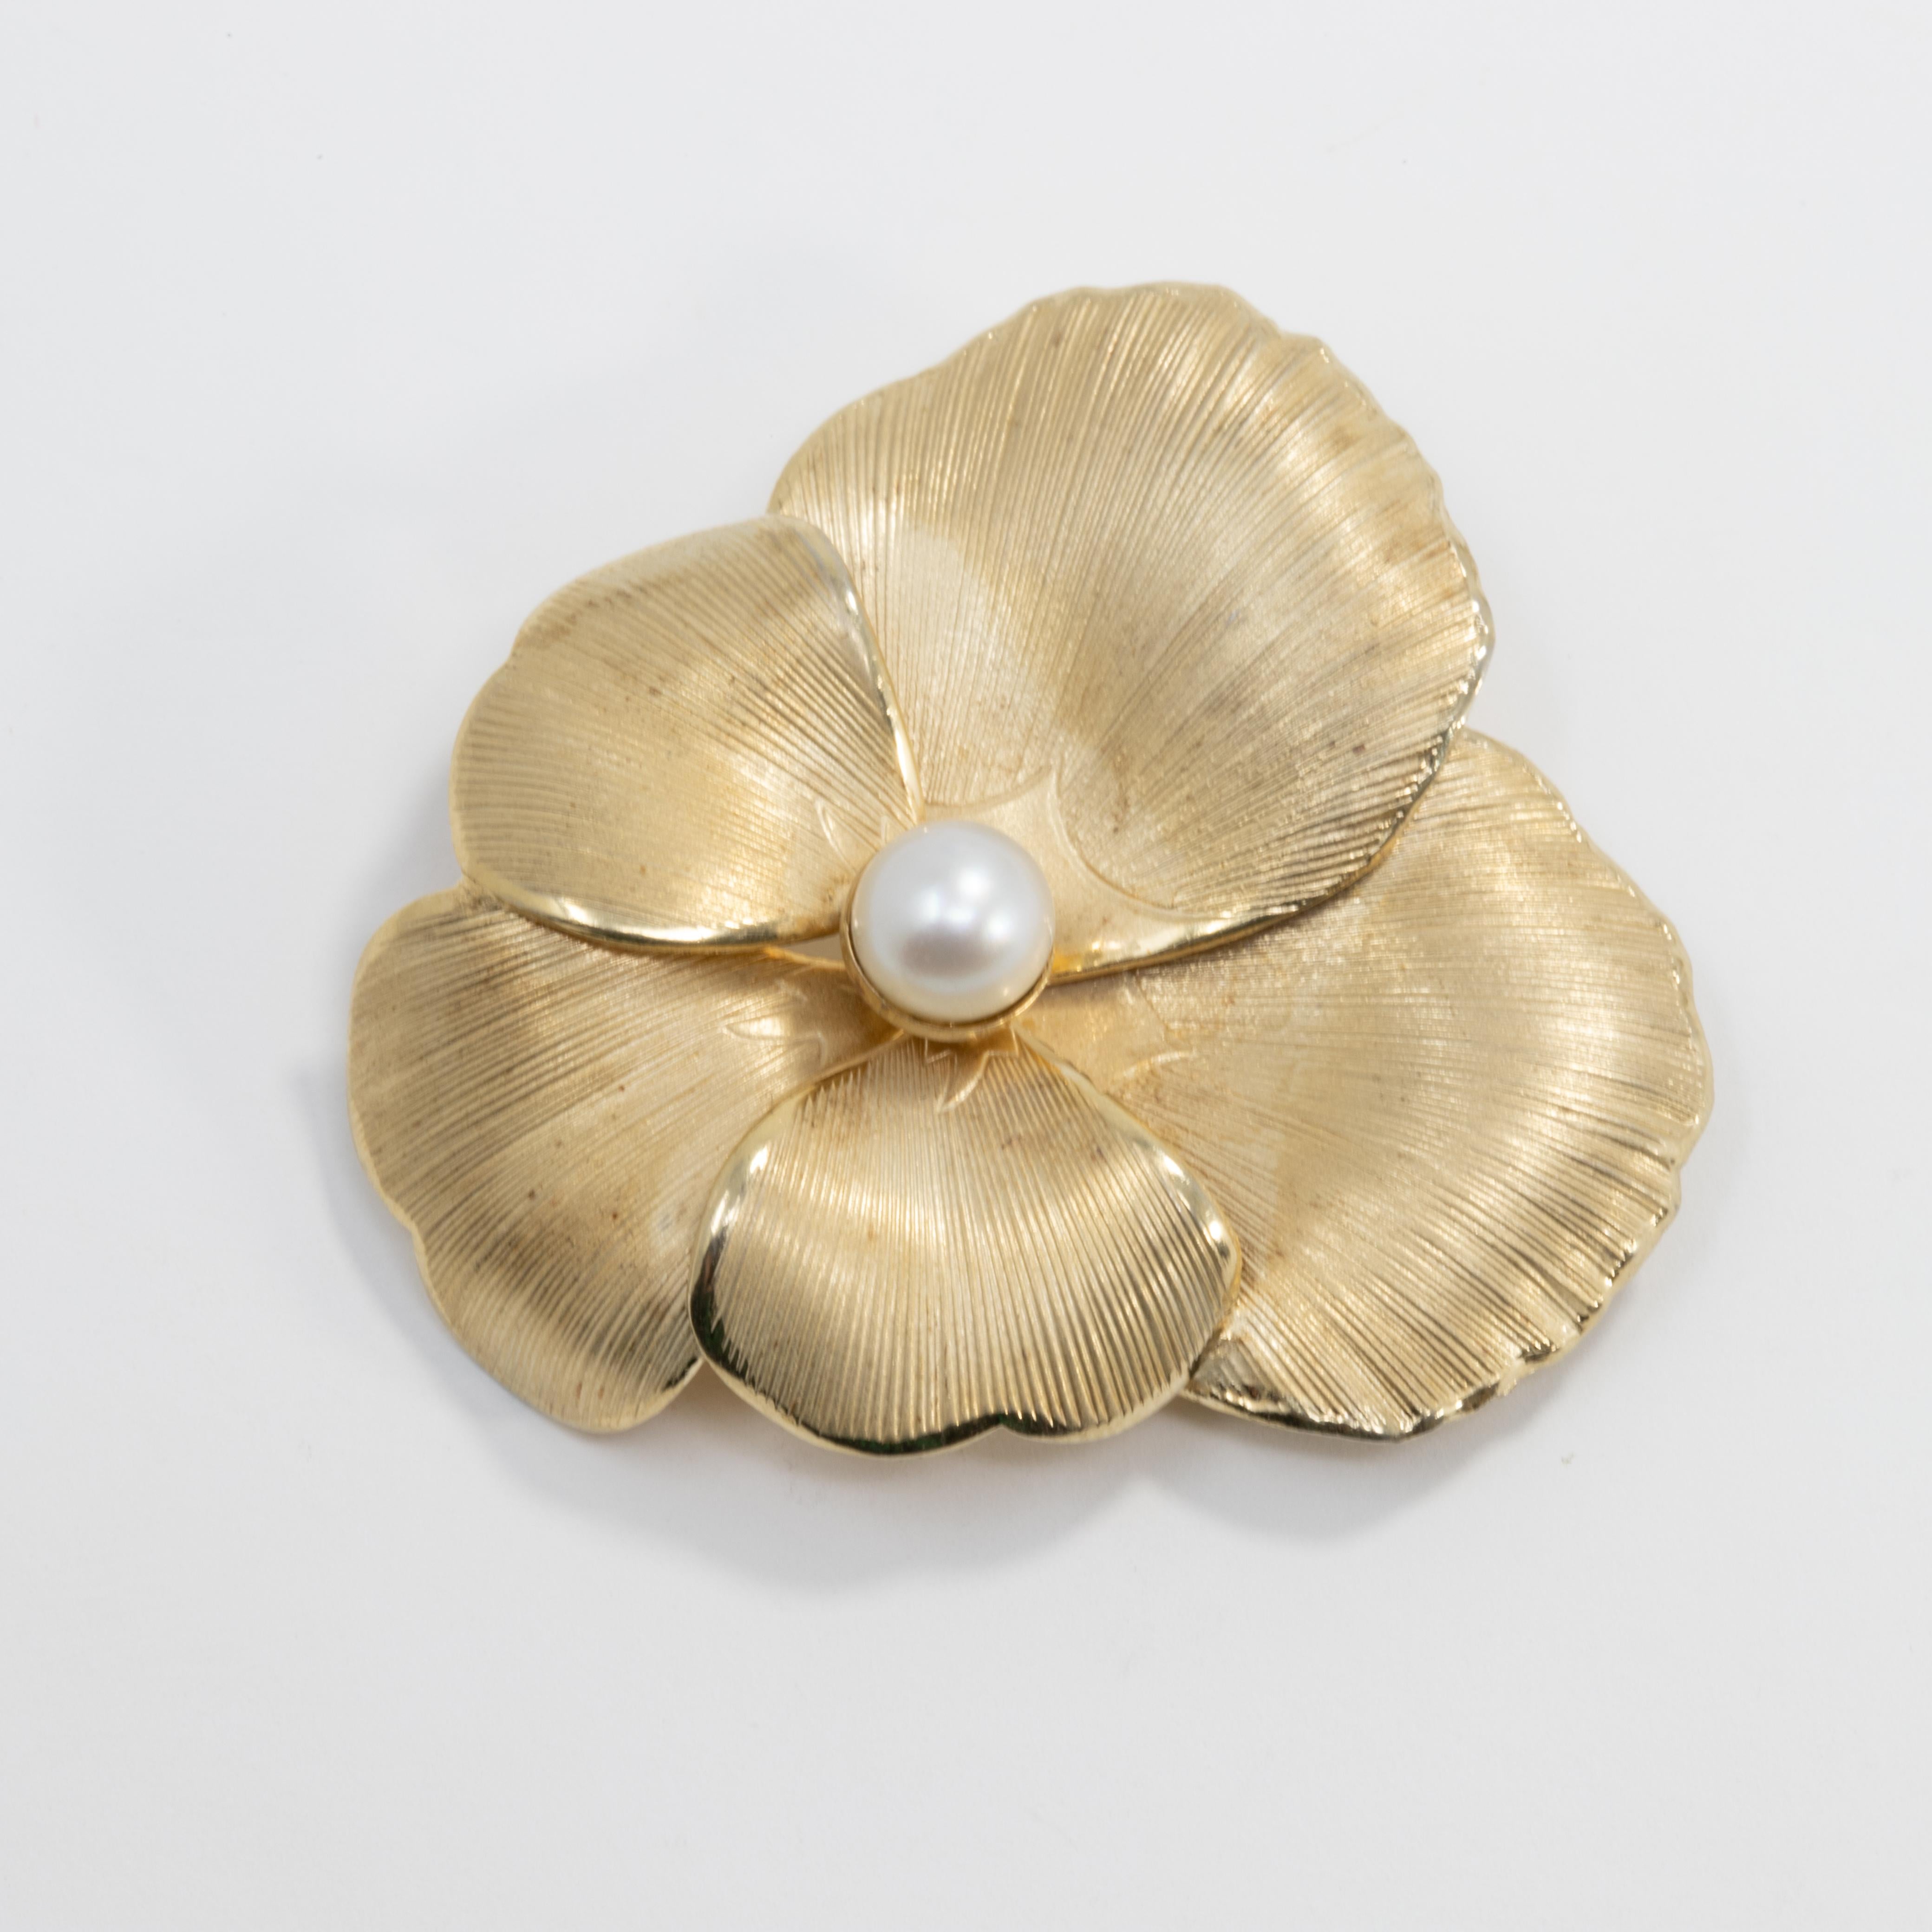 An exquisite pin from Danecraft. This brooch features a flower composed of five textured gold petals and a centerpiece cultured pearl. A classy accessory with a beautiful glow!

Hallmarks: Danecraft, R, 1/20-12K-G.F.